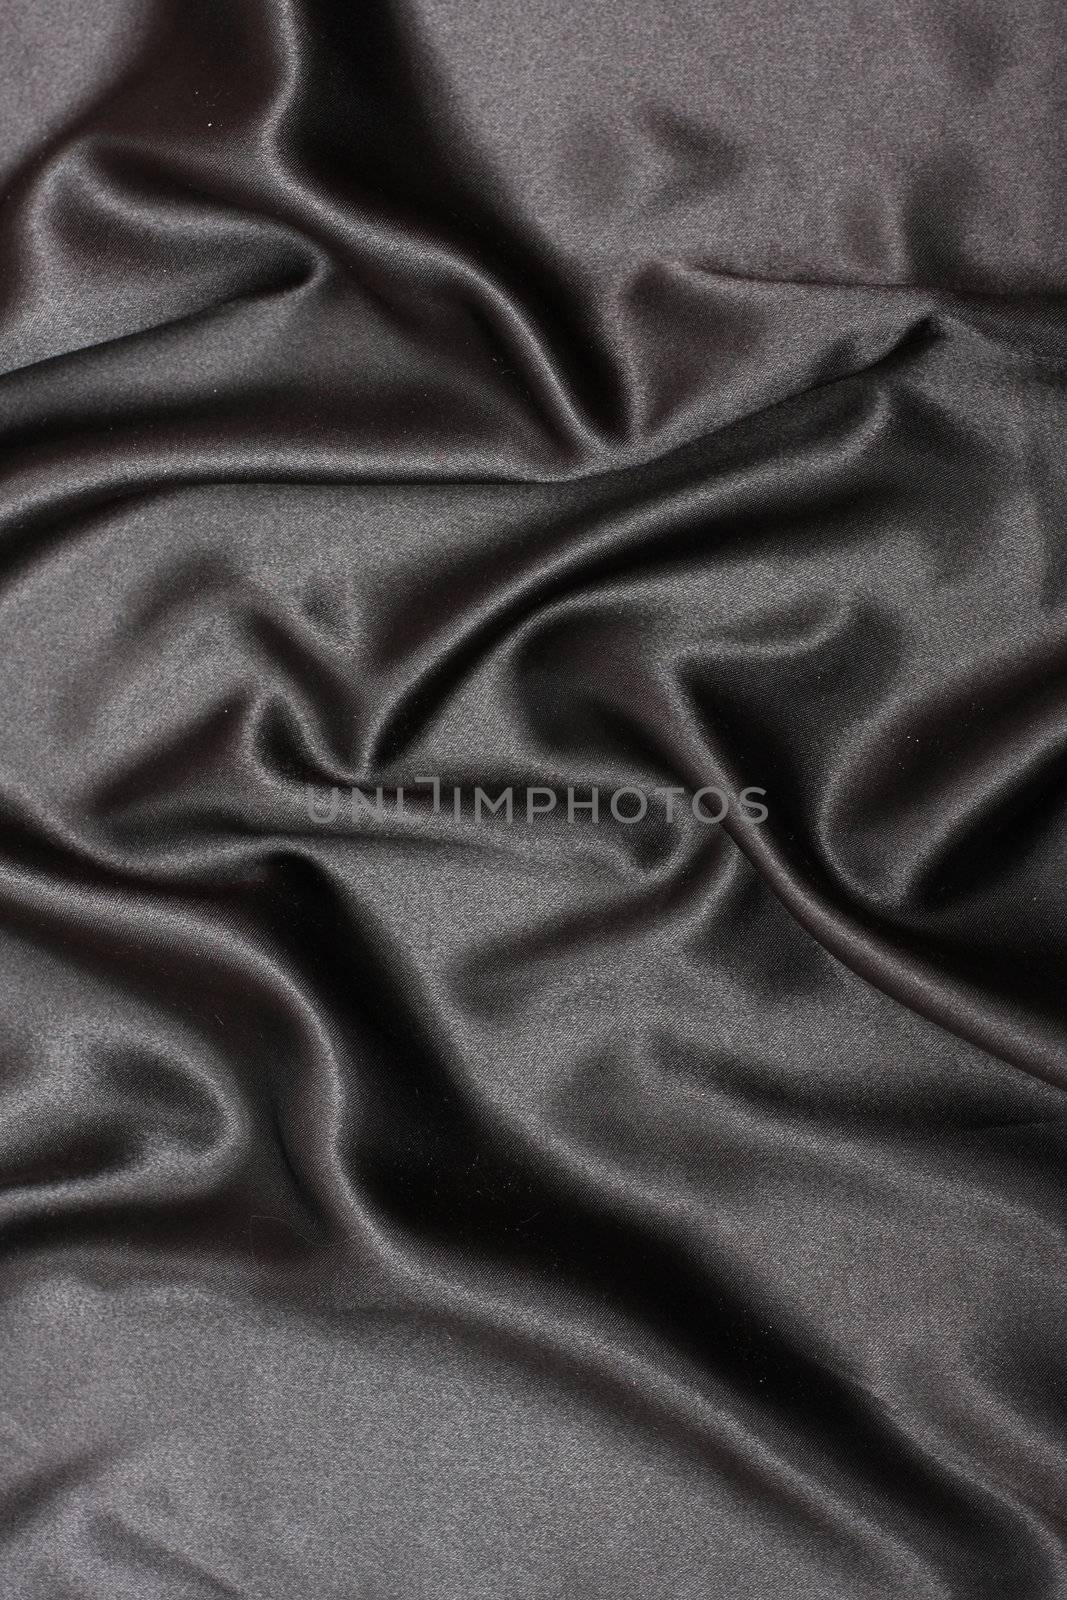 Black satin background, nice texture, and patterns